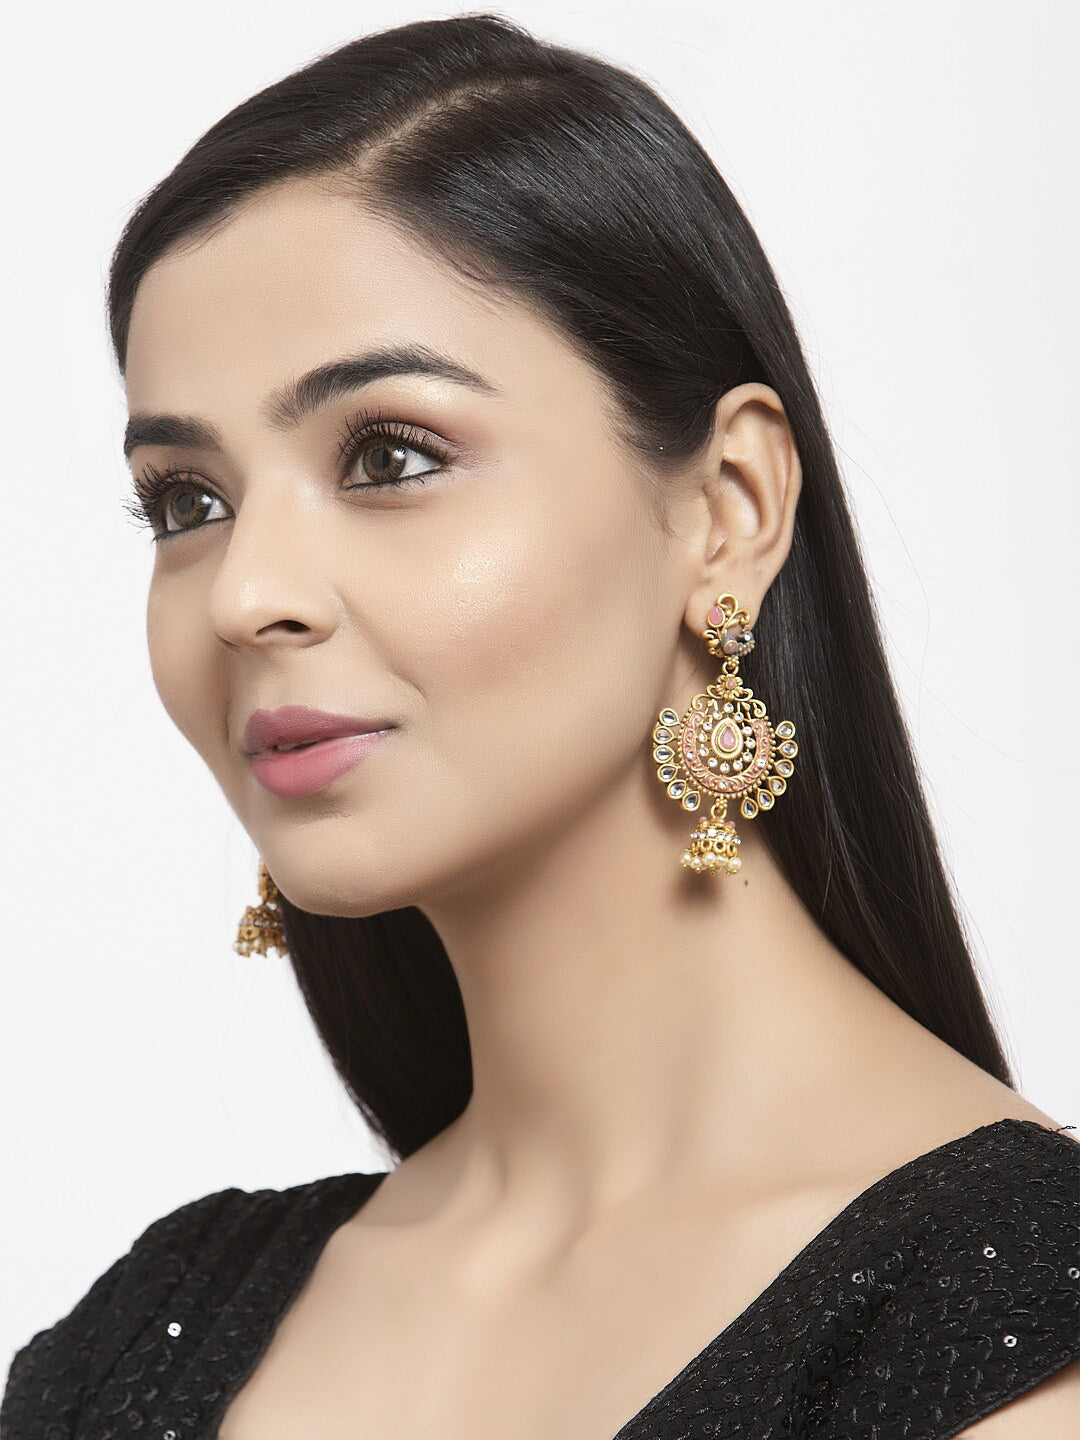 Specially Designed Stunning Earrings | Buy Online Earrings | Online earrings,  Bridal jewelry, Indian wedding jewelry